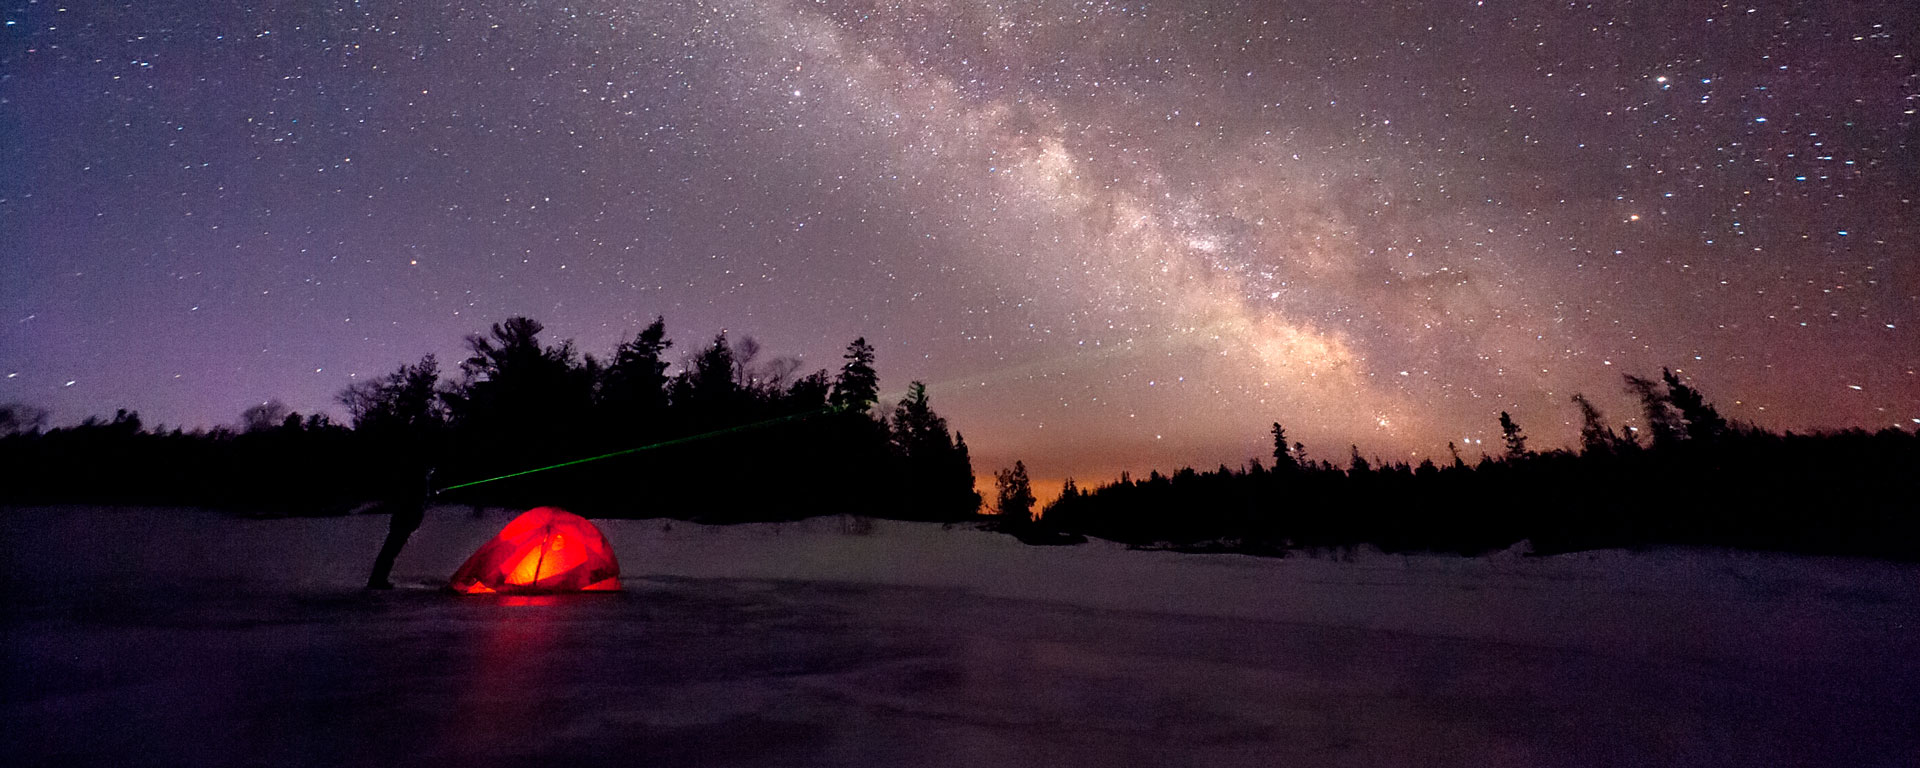 a tent glowing from the light within set on a frozen landscape with a vibrant night sky showcasing the milky way stars